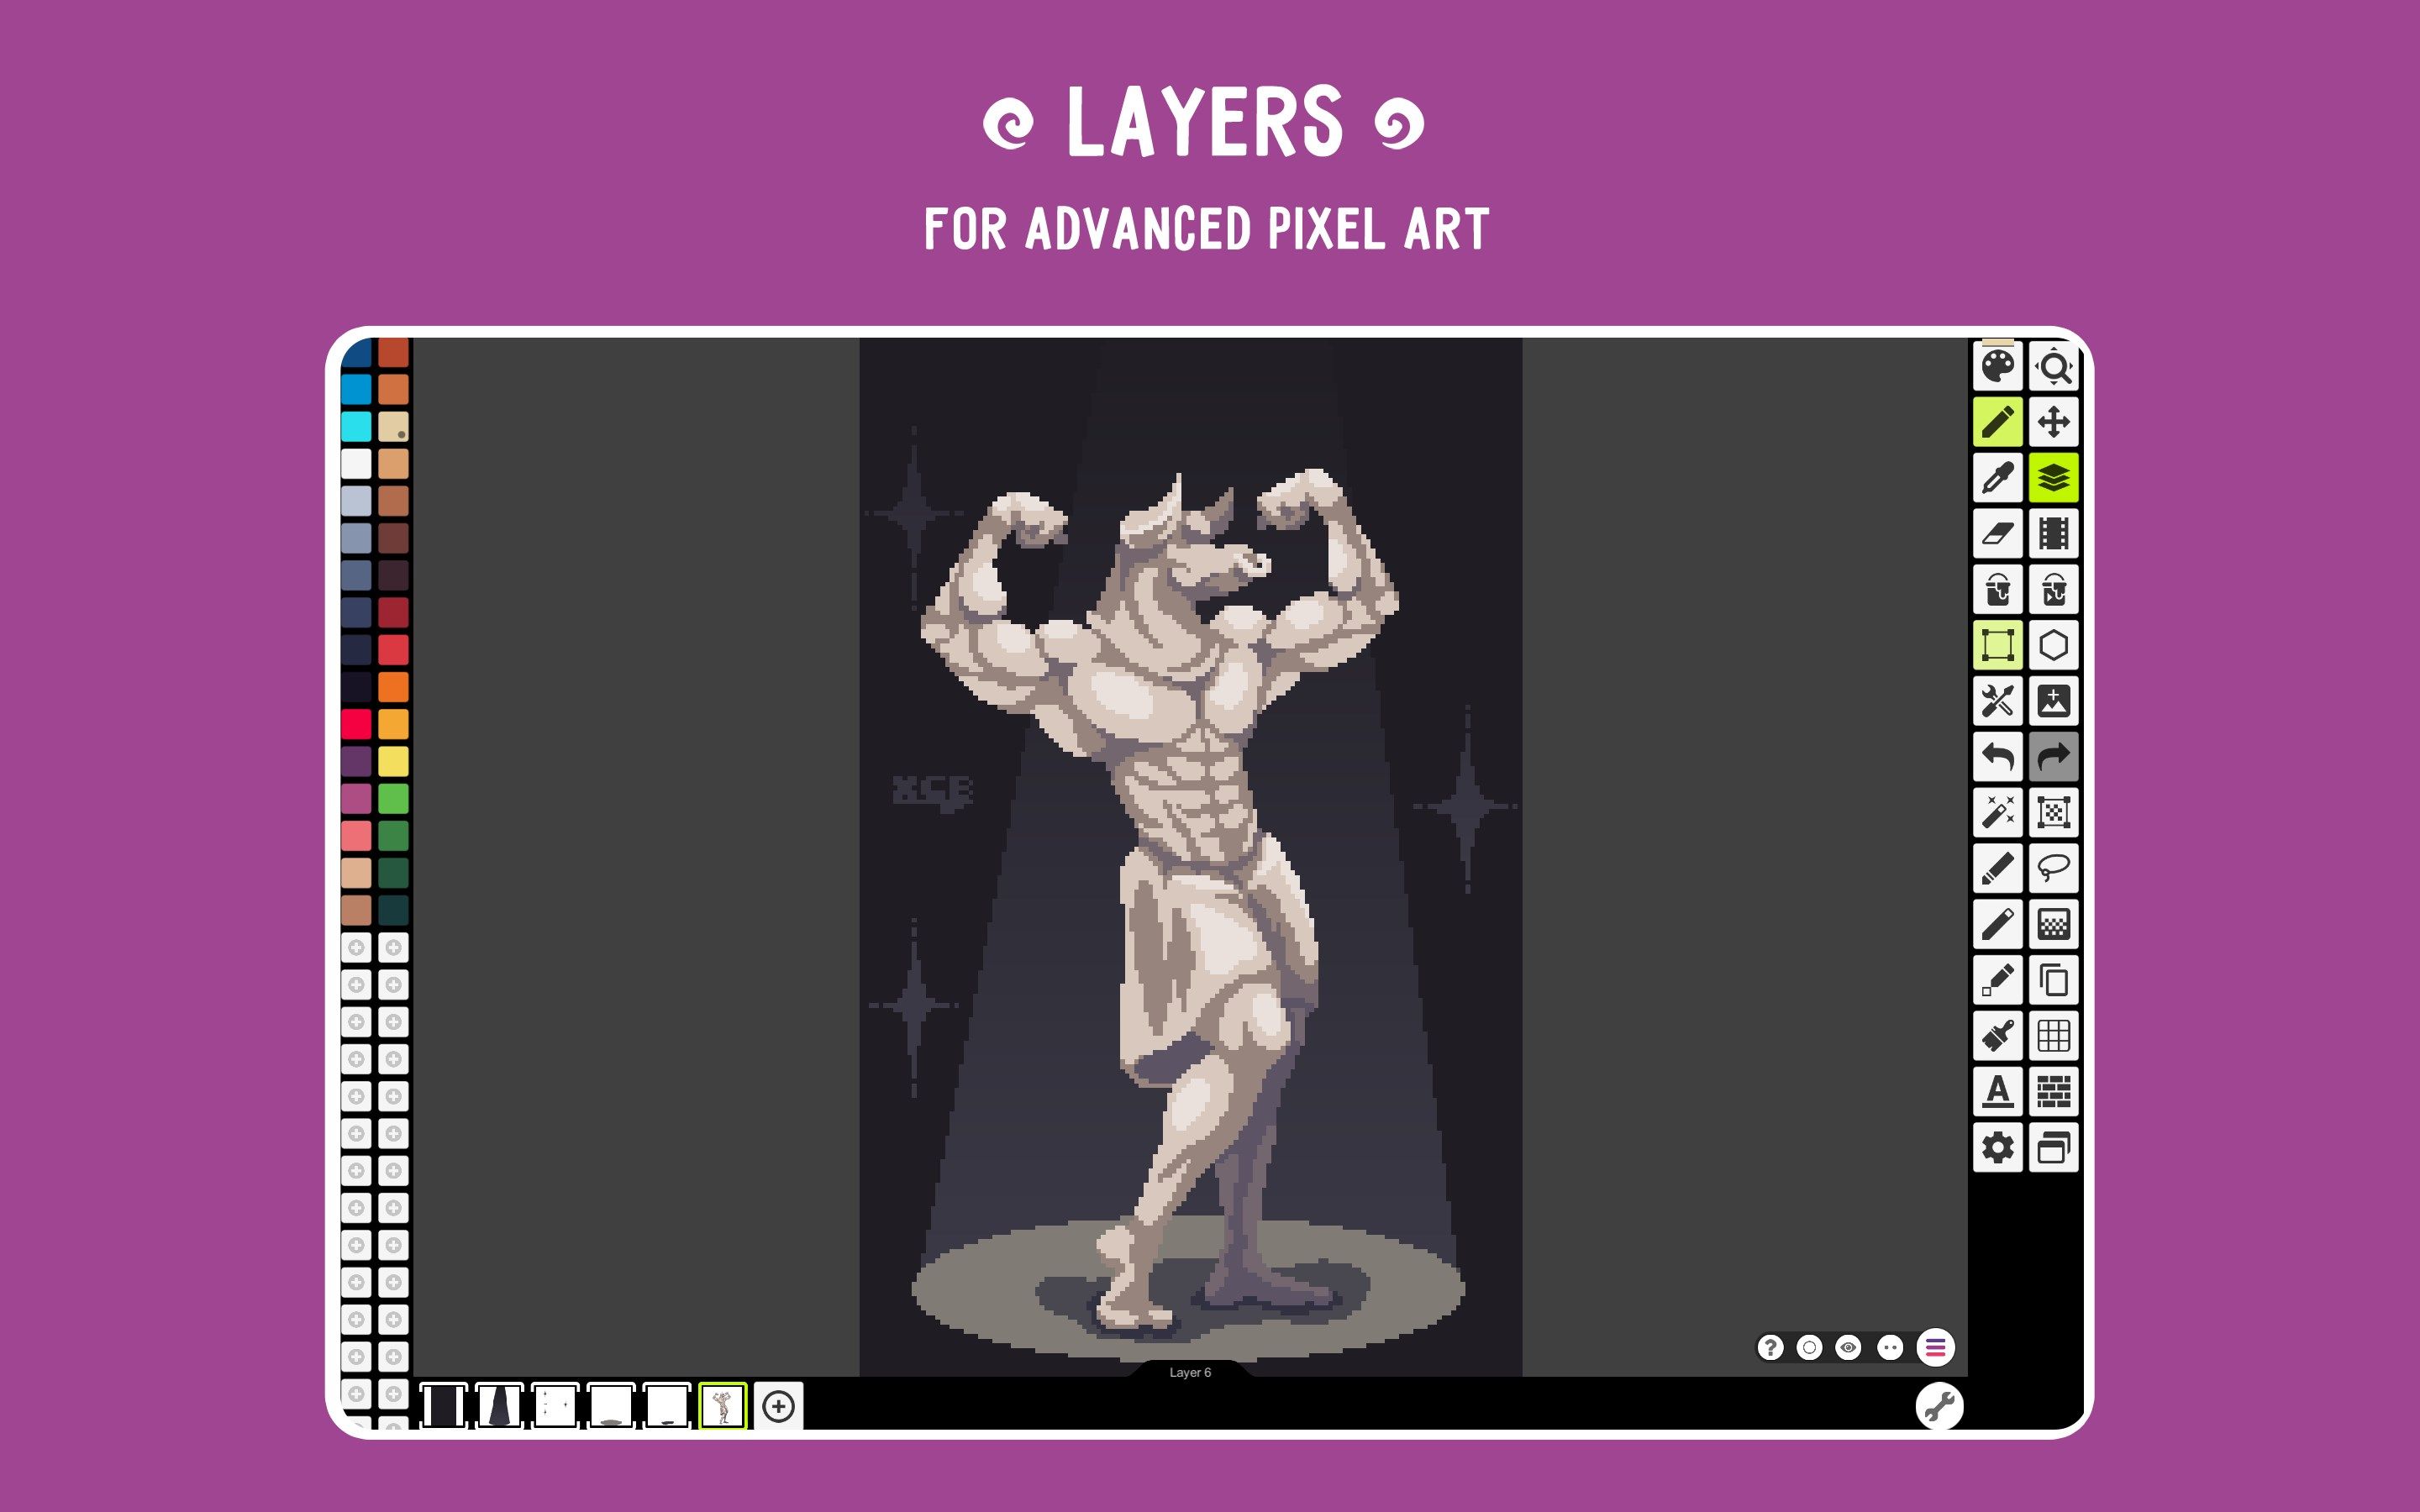 Use layers for advanced pixel art